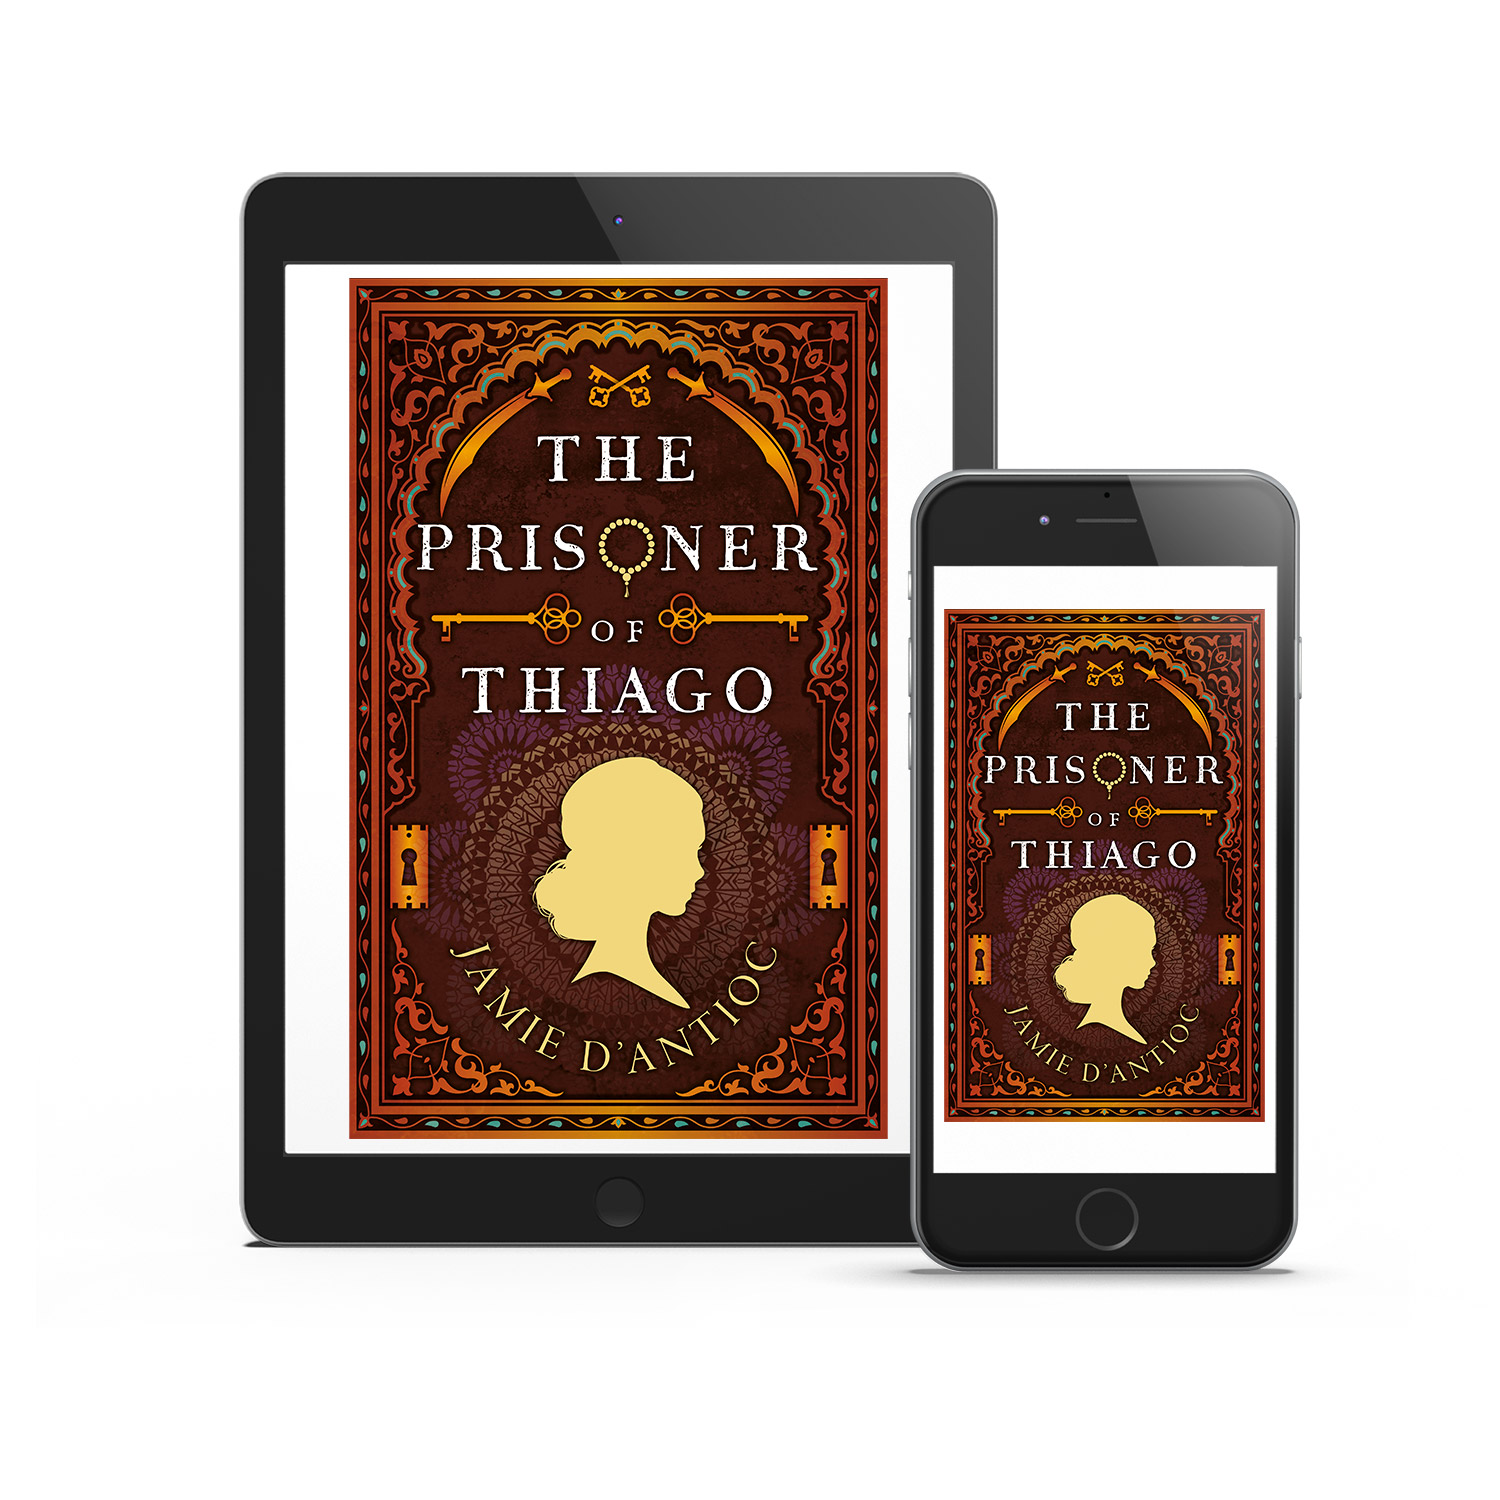 'The Prisoner of Thiago' is a thrilling historical novel, by Jamie D'Antioc. The book cover and interior were designed by Mark Thomas, of coverness.com. To find out more about my book design services, please visit www.coverness.com.